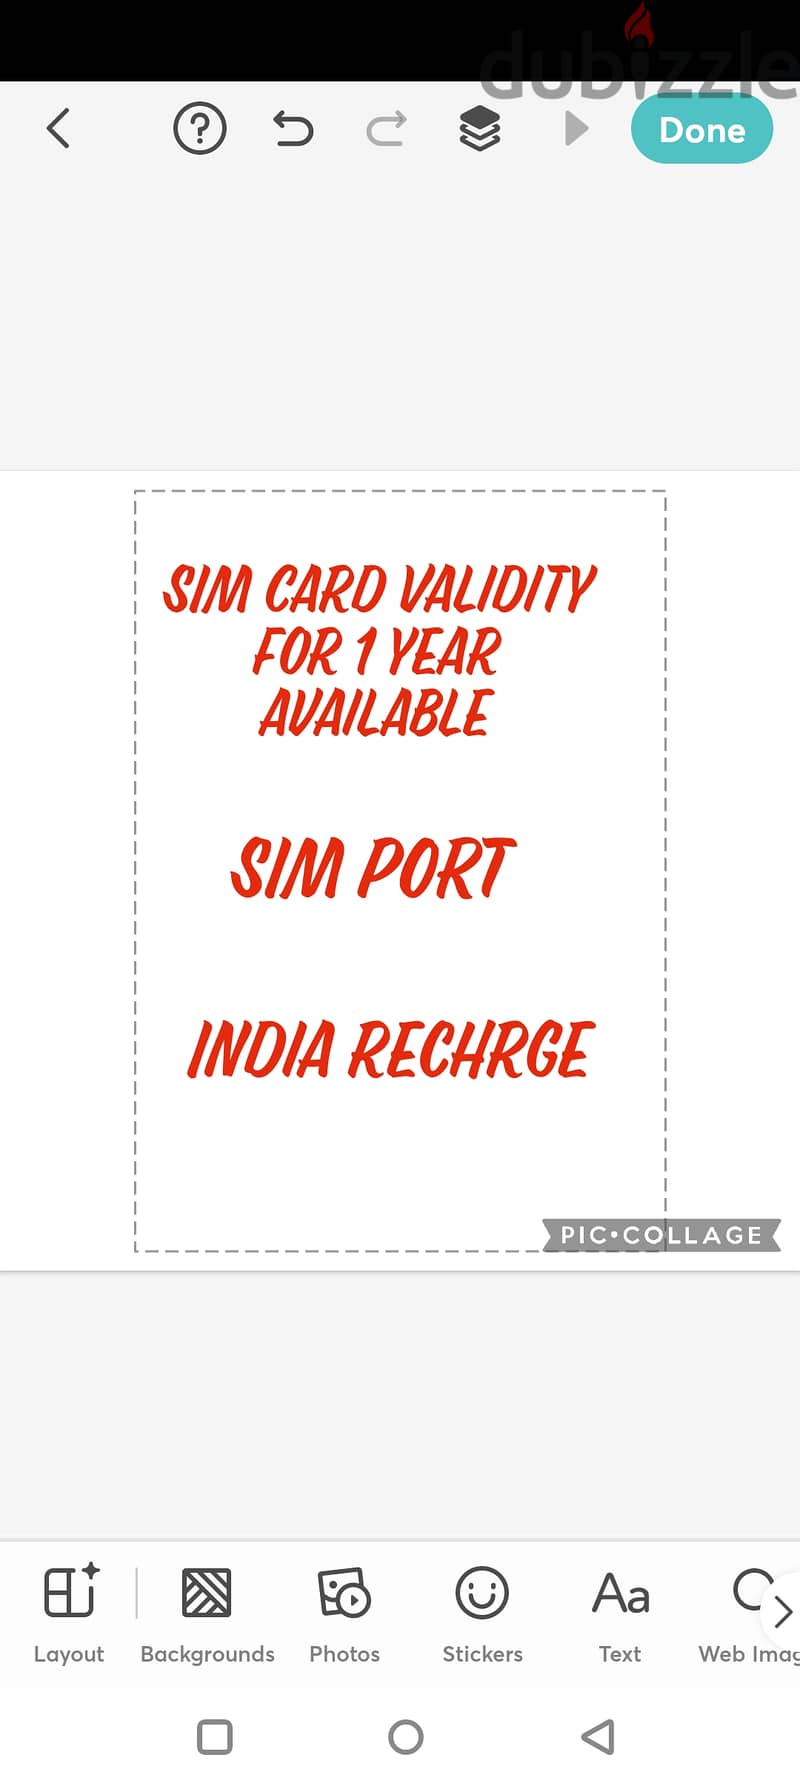 Sim cards offers 3 months 900gb 1000 mints oreedo and stc 0